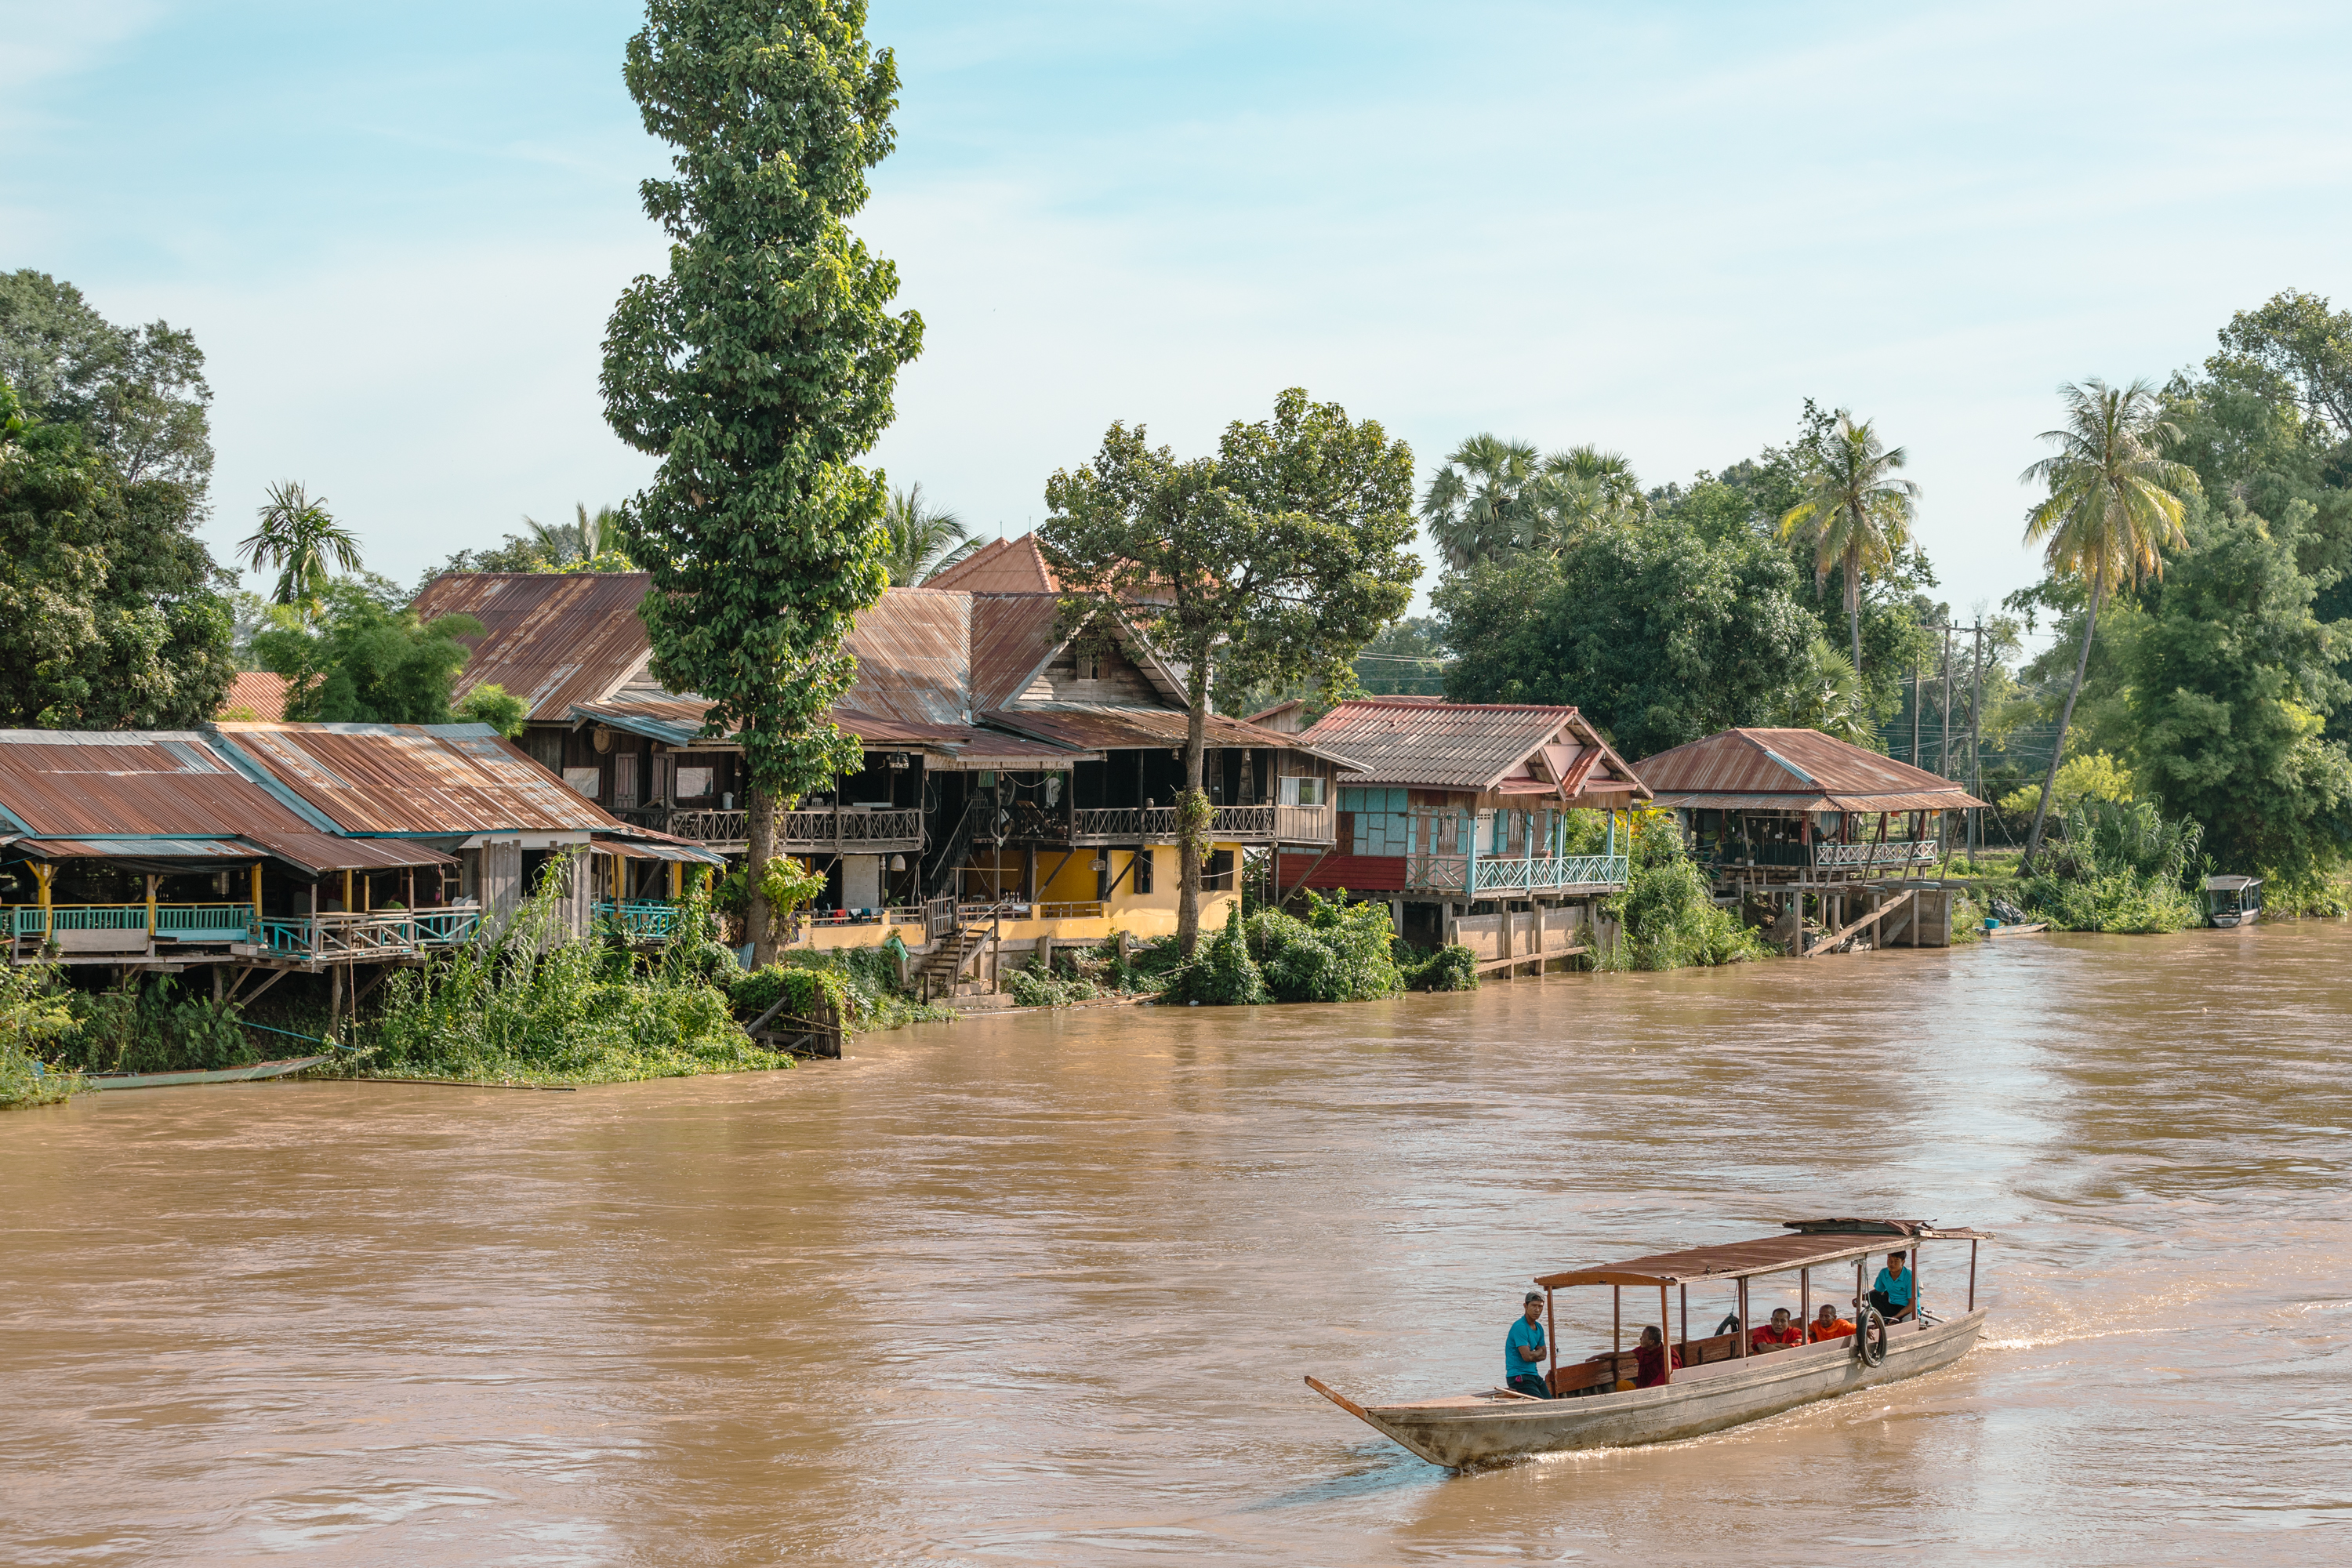 3 Ways to Preserve the Natural Wonders of the Mekong